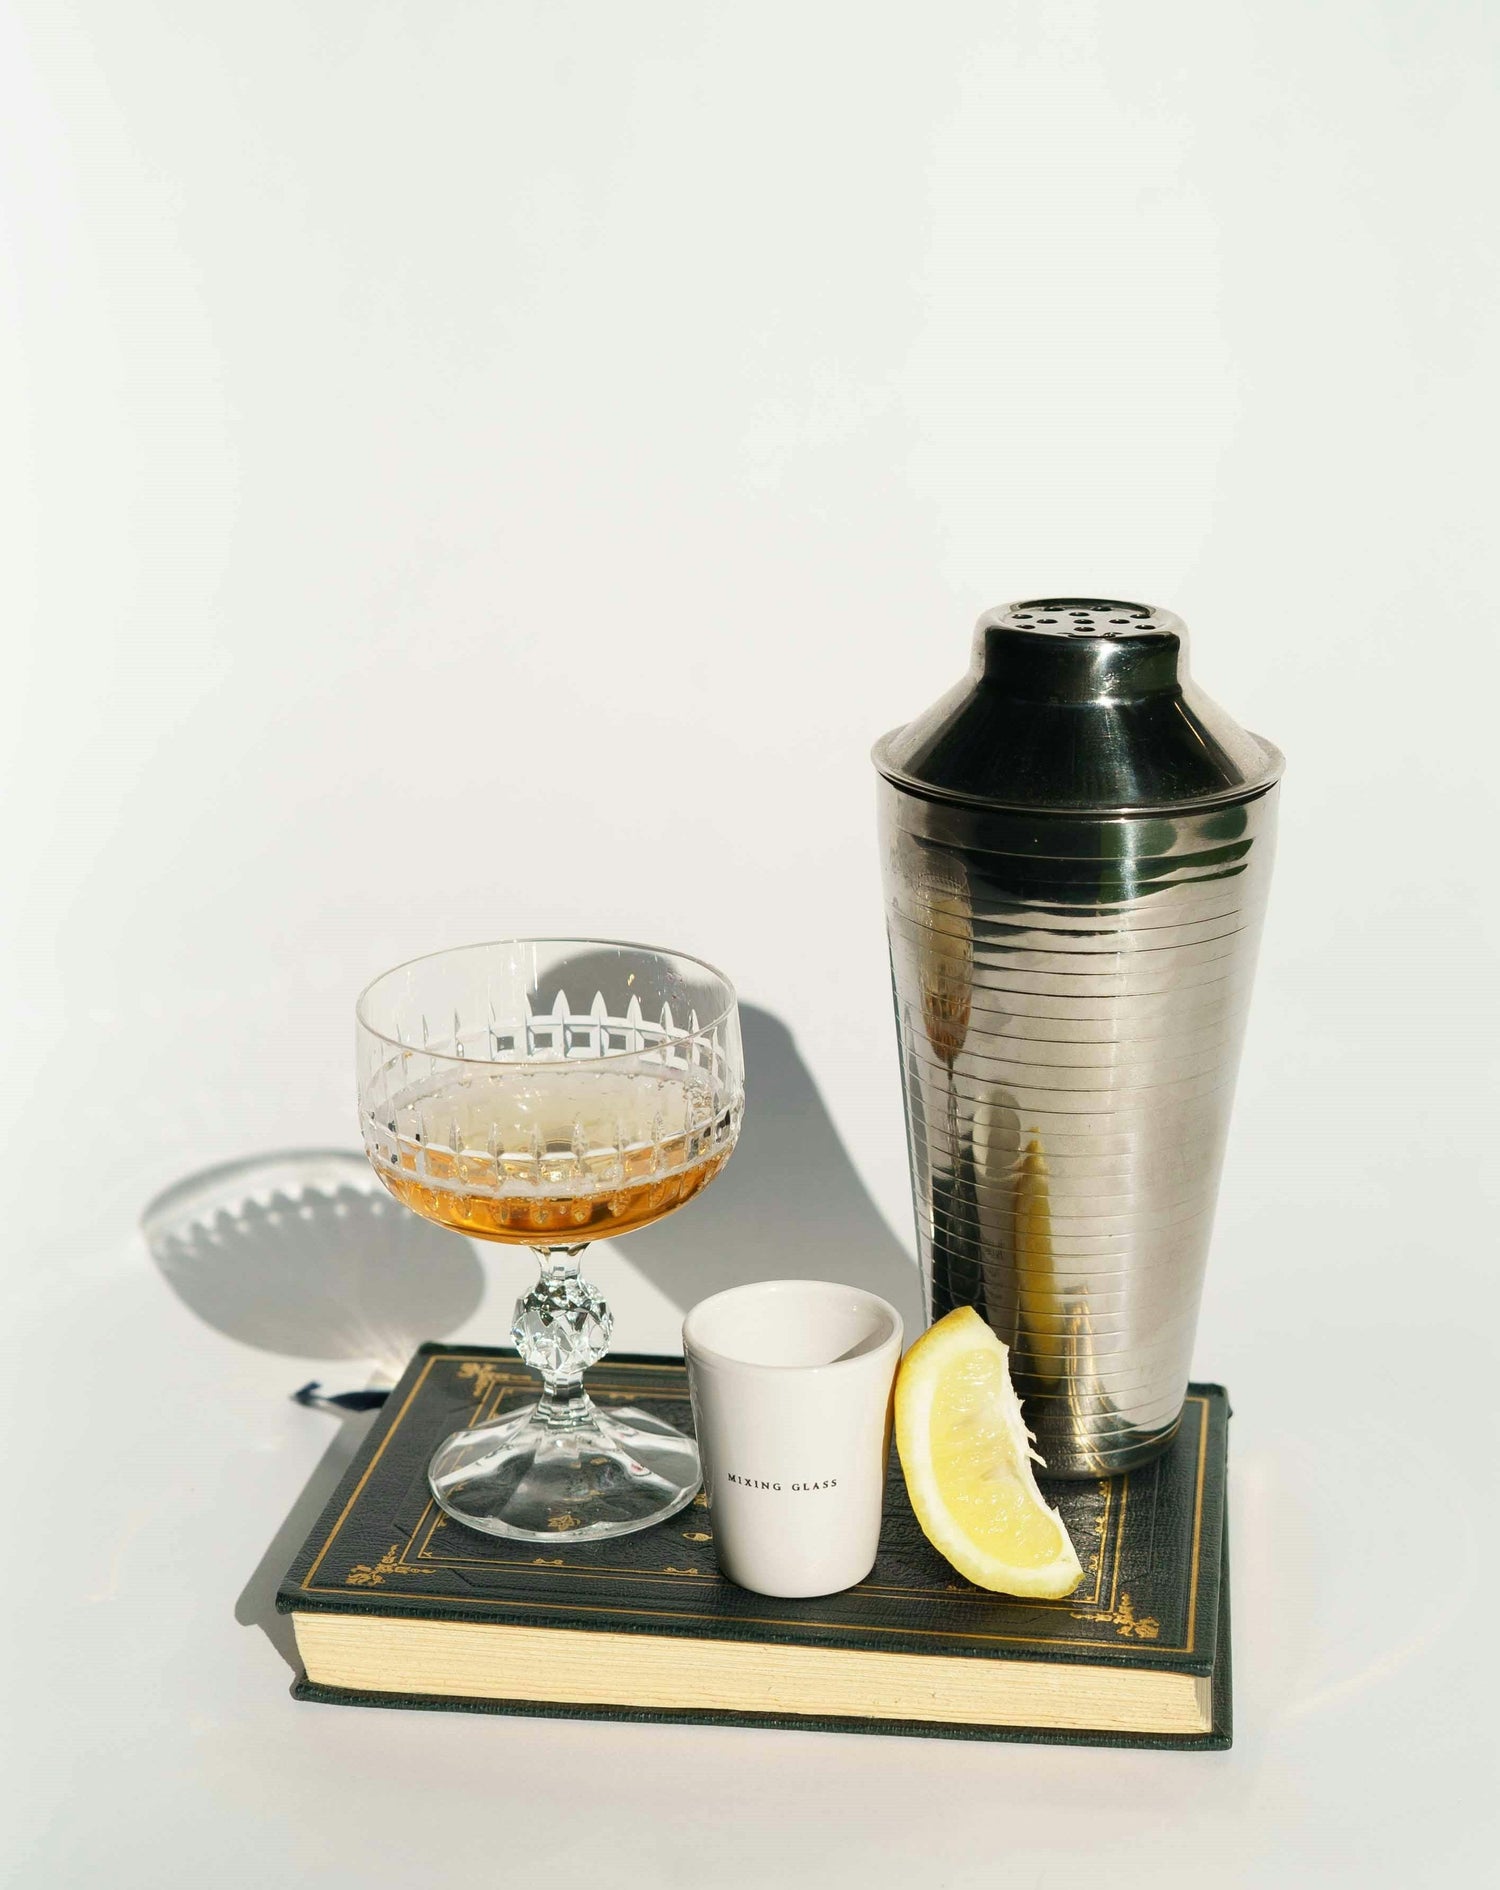 "An assortment of sleek, modern bar tools neatly arranged on a countertop, including shakers, strainers, jiggers, stirrers, and glasses, ready for crafting delicious cocktails.